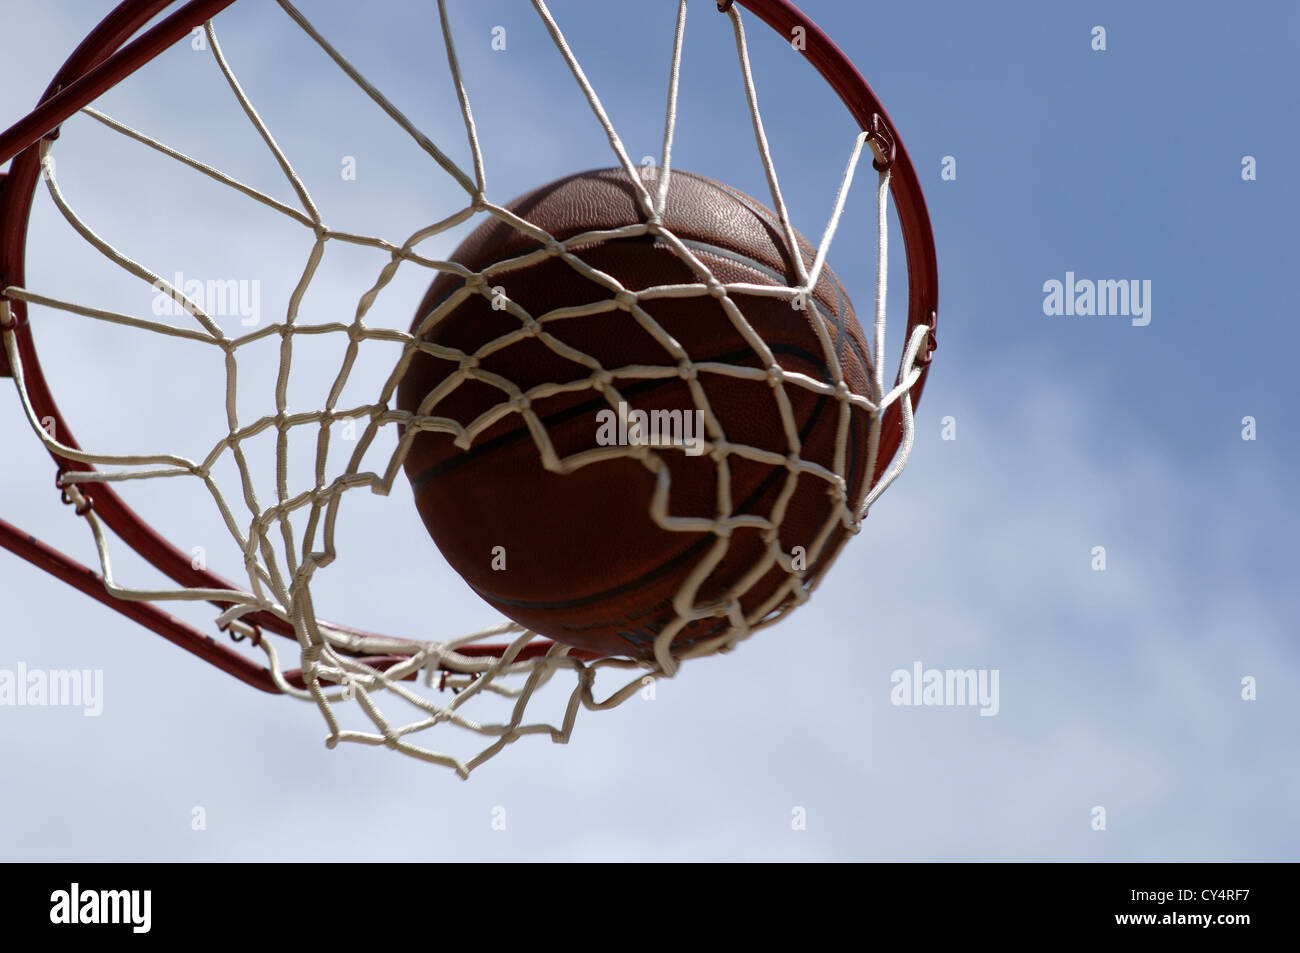 Basketball going through net with a blue cloudy sky background Stock Photo